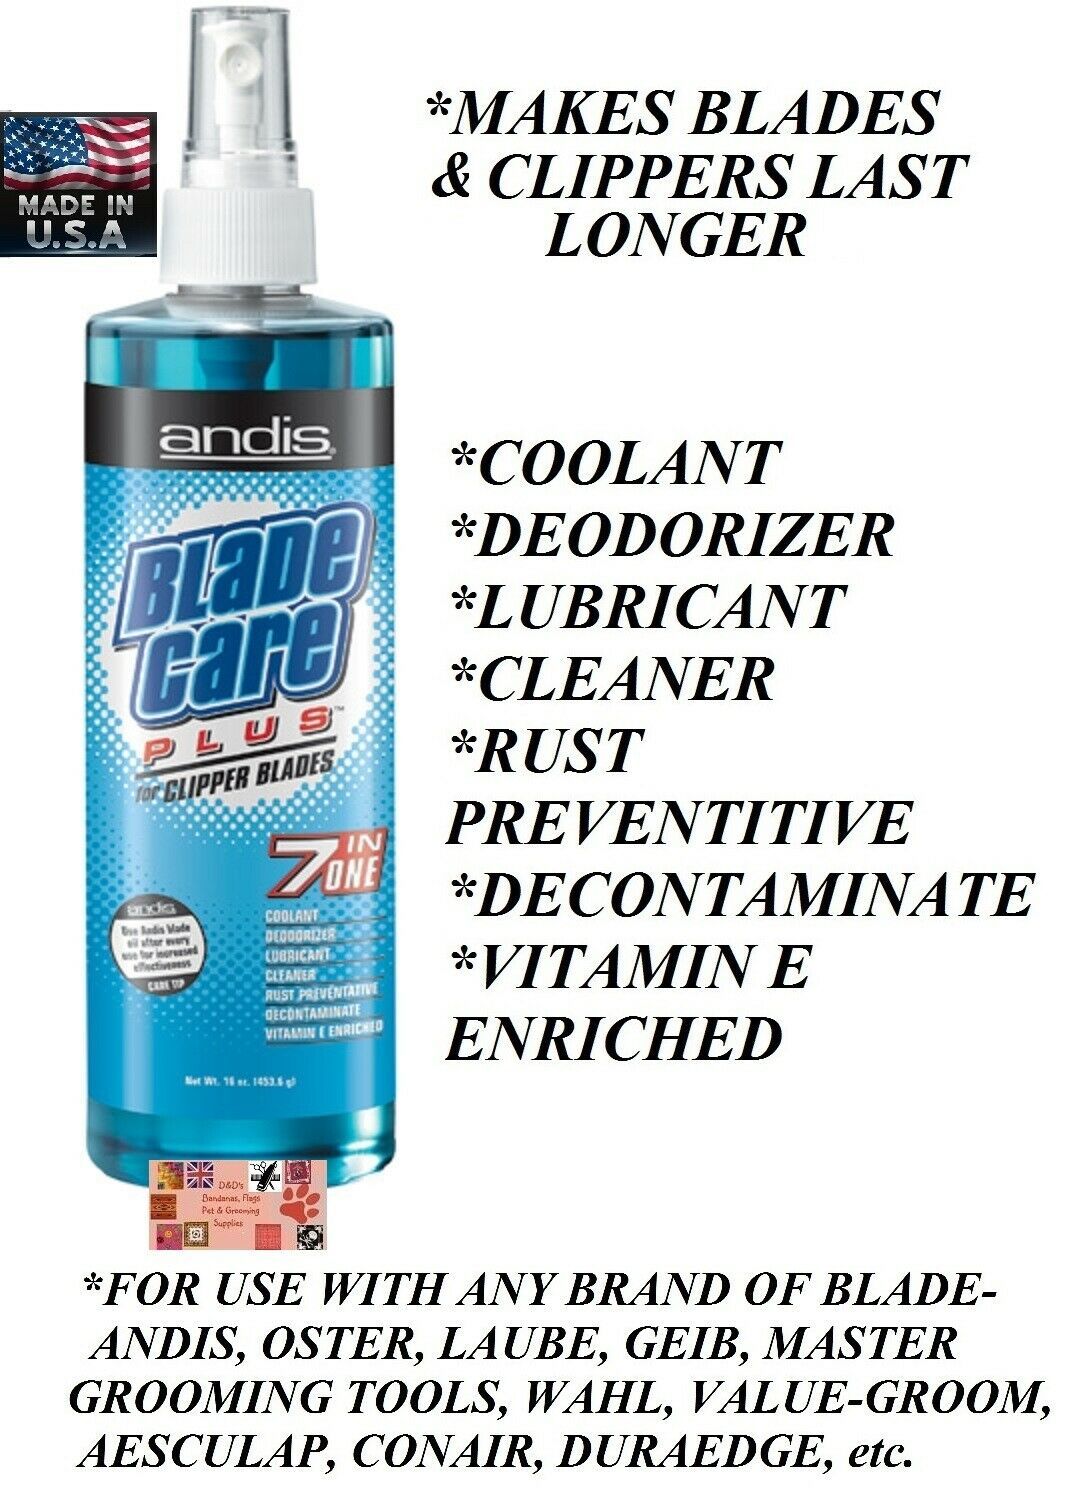 ANDIS 7 in 1 CLIPPER BLADE CARE PLUS Spray Cleaner,Cooling,Lube*FOR AG,BG,A5,76